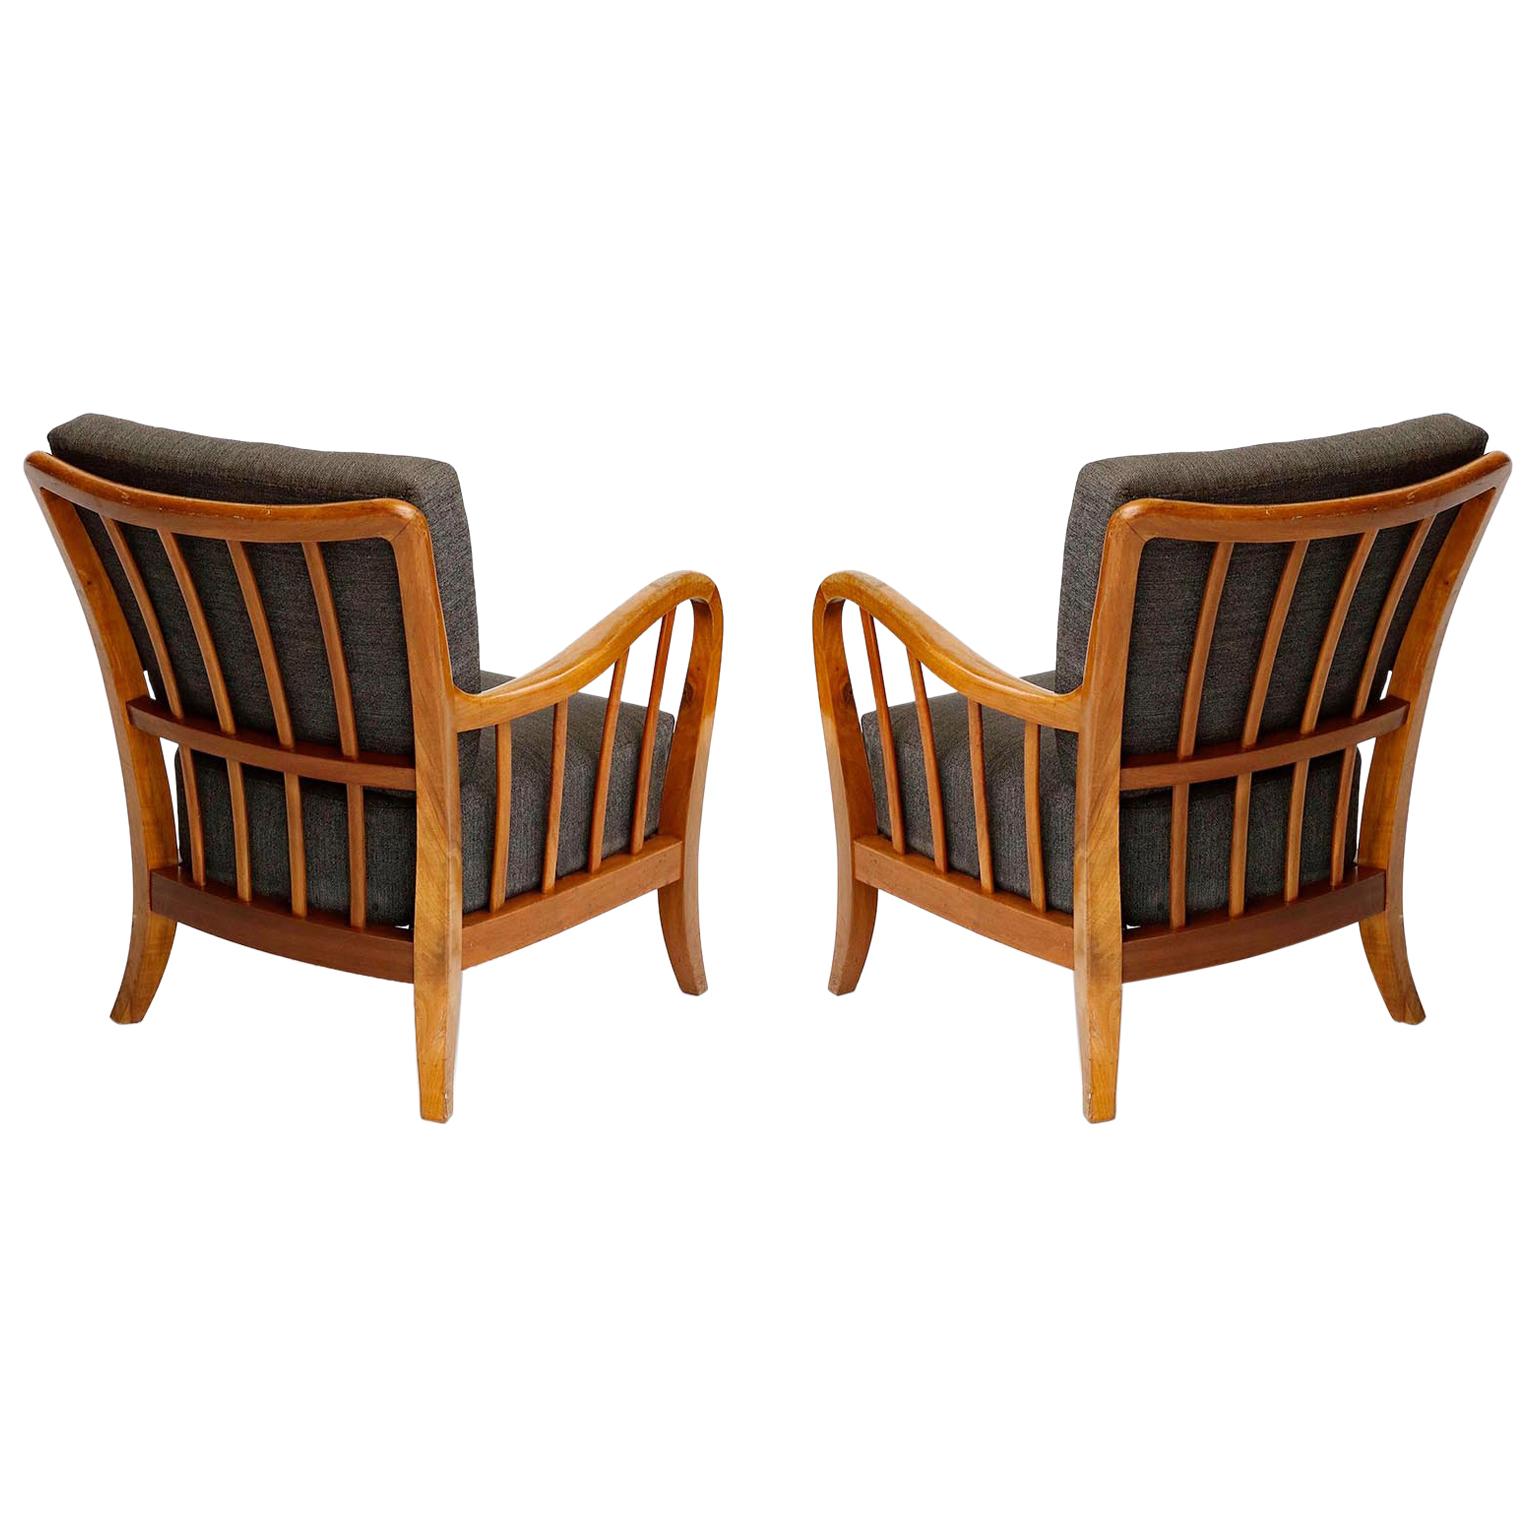 Pair of Armchairs Lounge Chairs Wood, Attributed to Josef Frank, Thonet, 1940